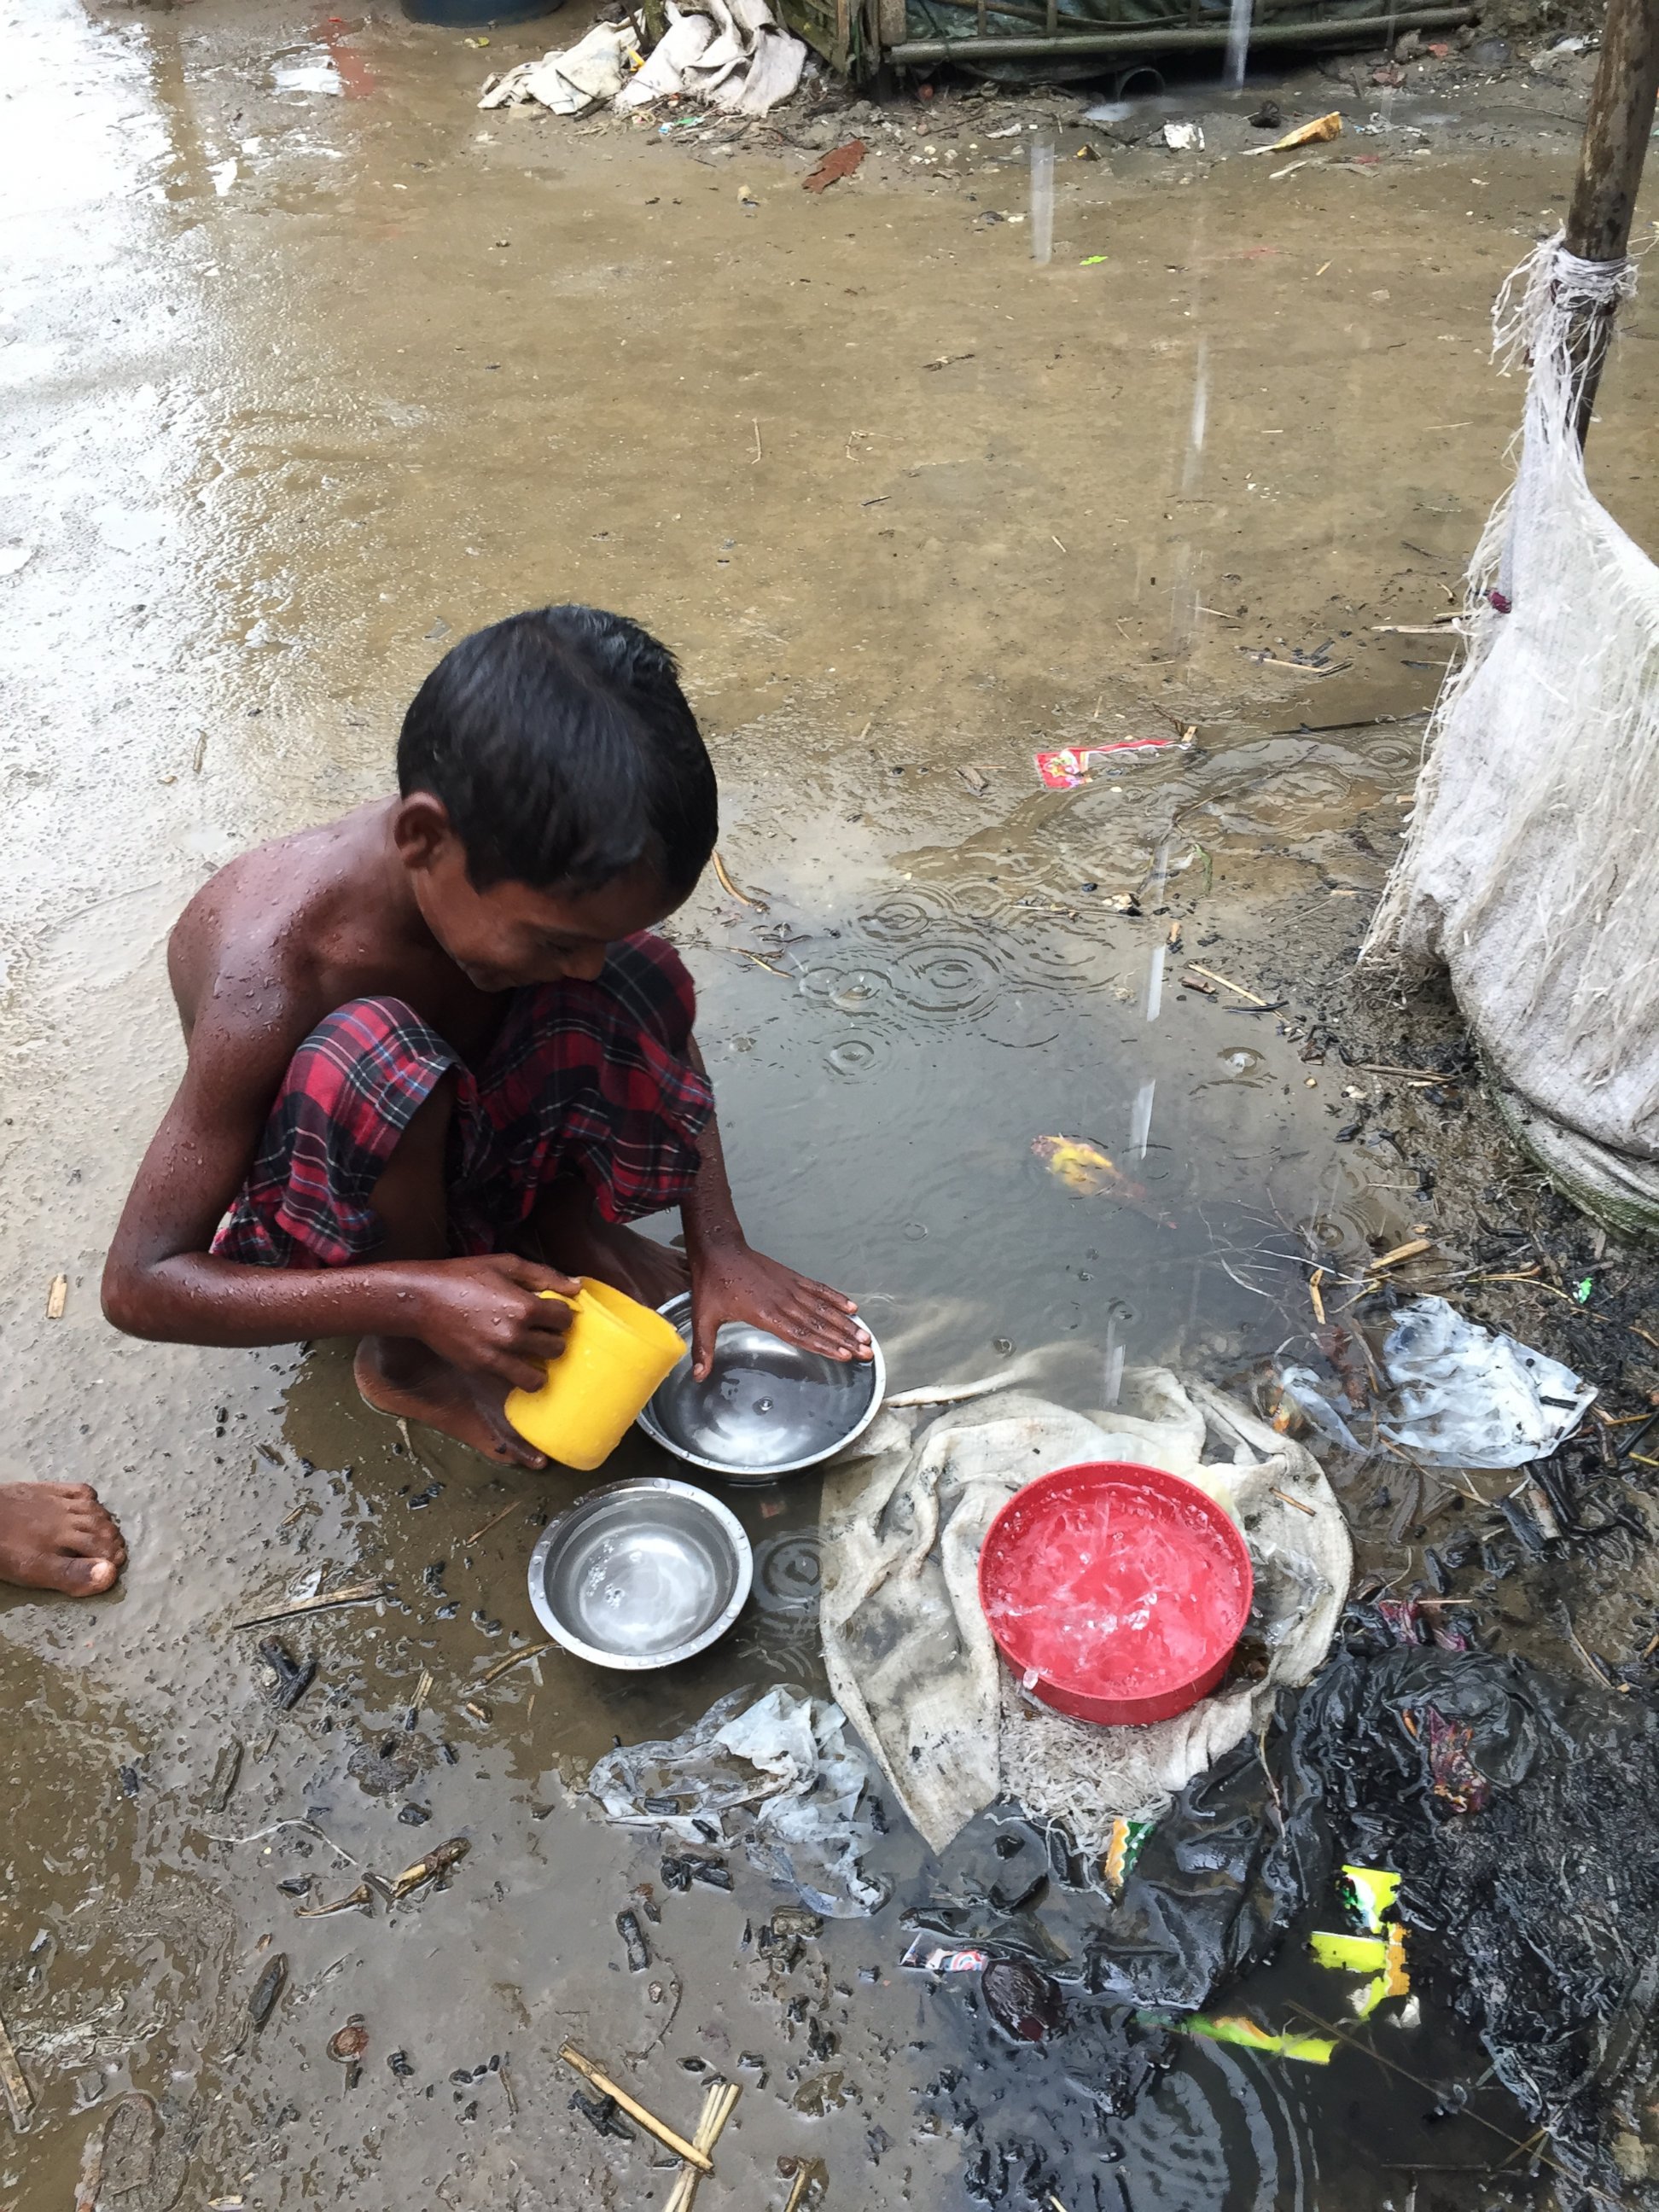 PHOTO: A young Rohingya boy in the refugee camp using rainwater to rinse dishes. 